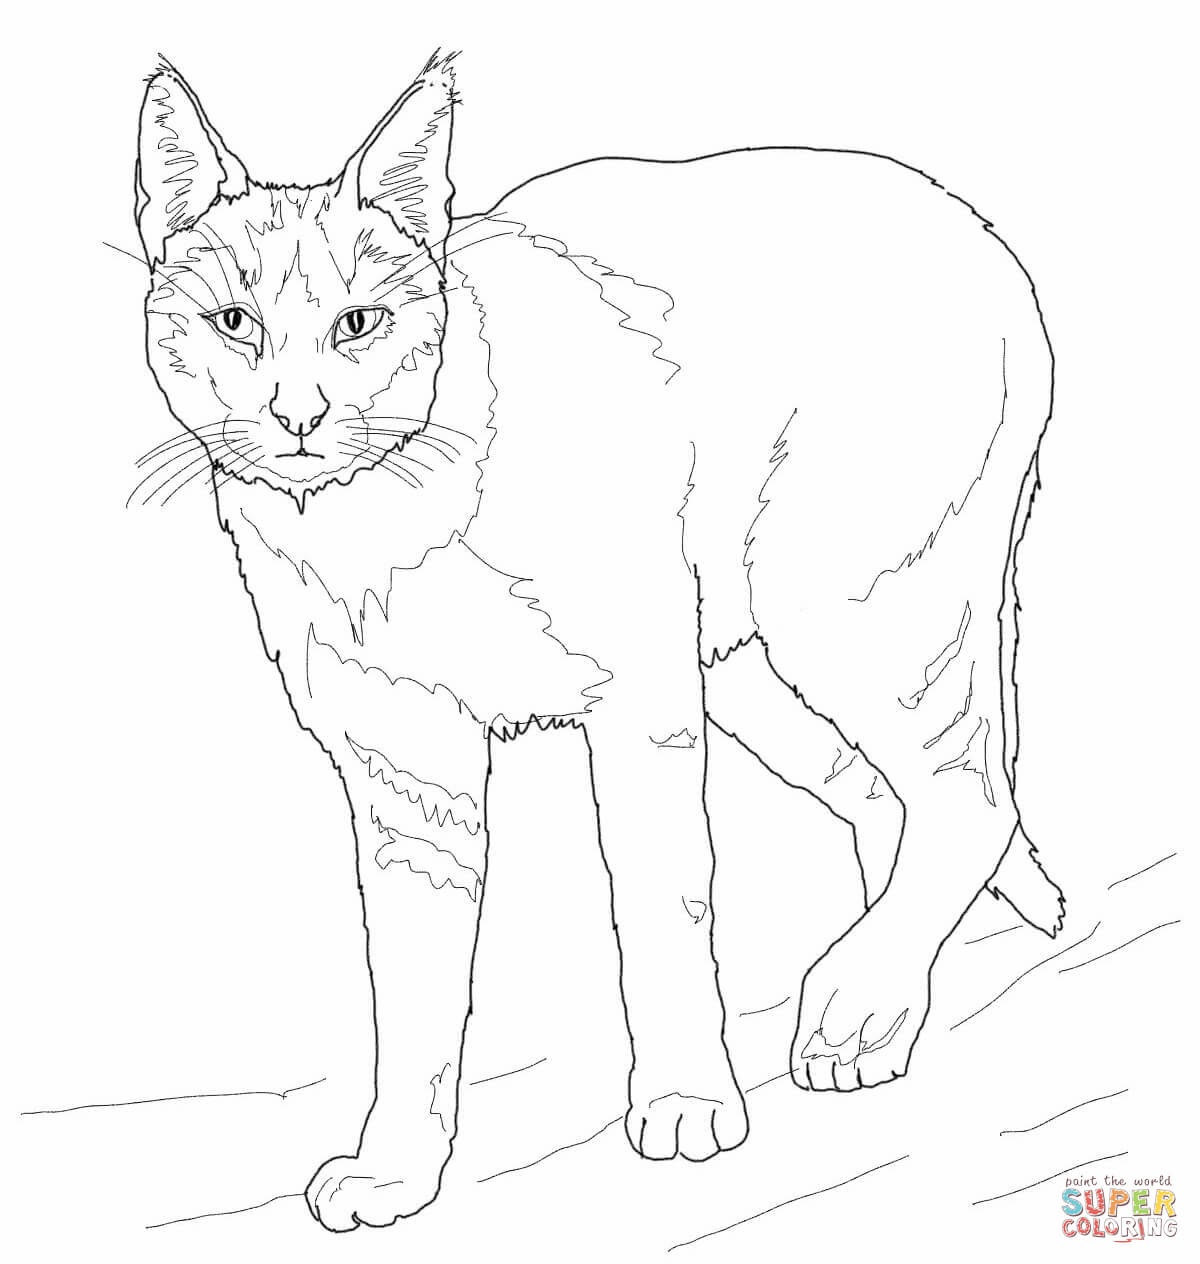 Cats clipart caracal. Jungle cat coloring page